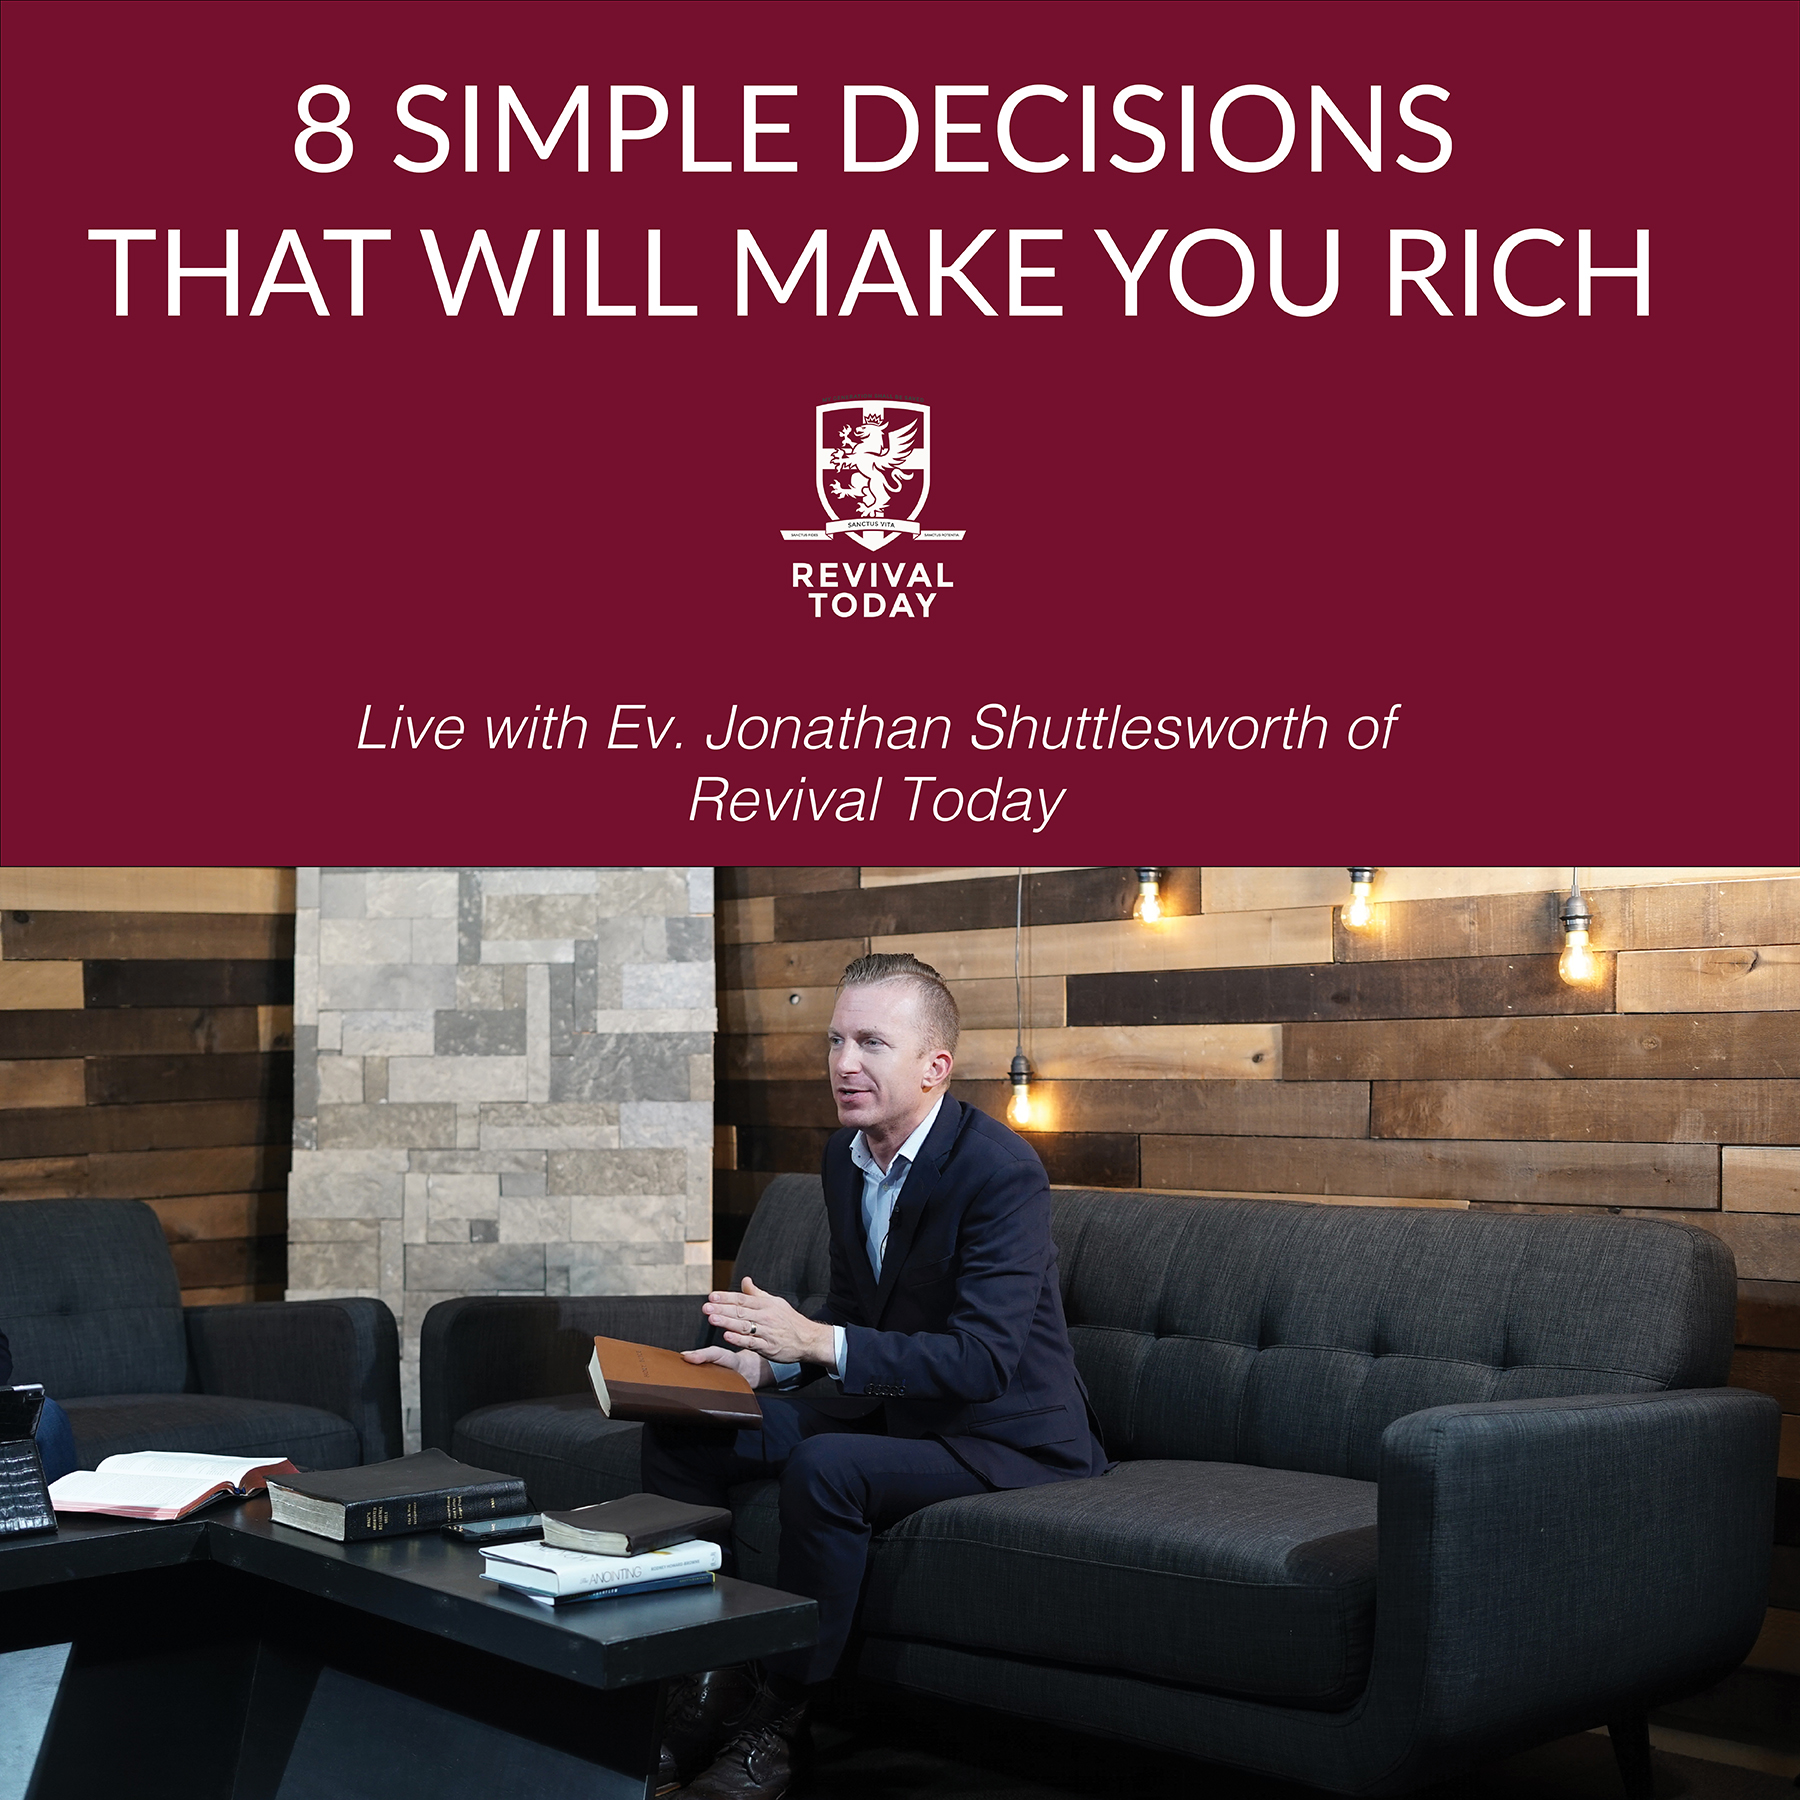 8 Simple Decisions that will make you rich with Jonathan Shuttlesworth